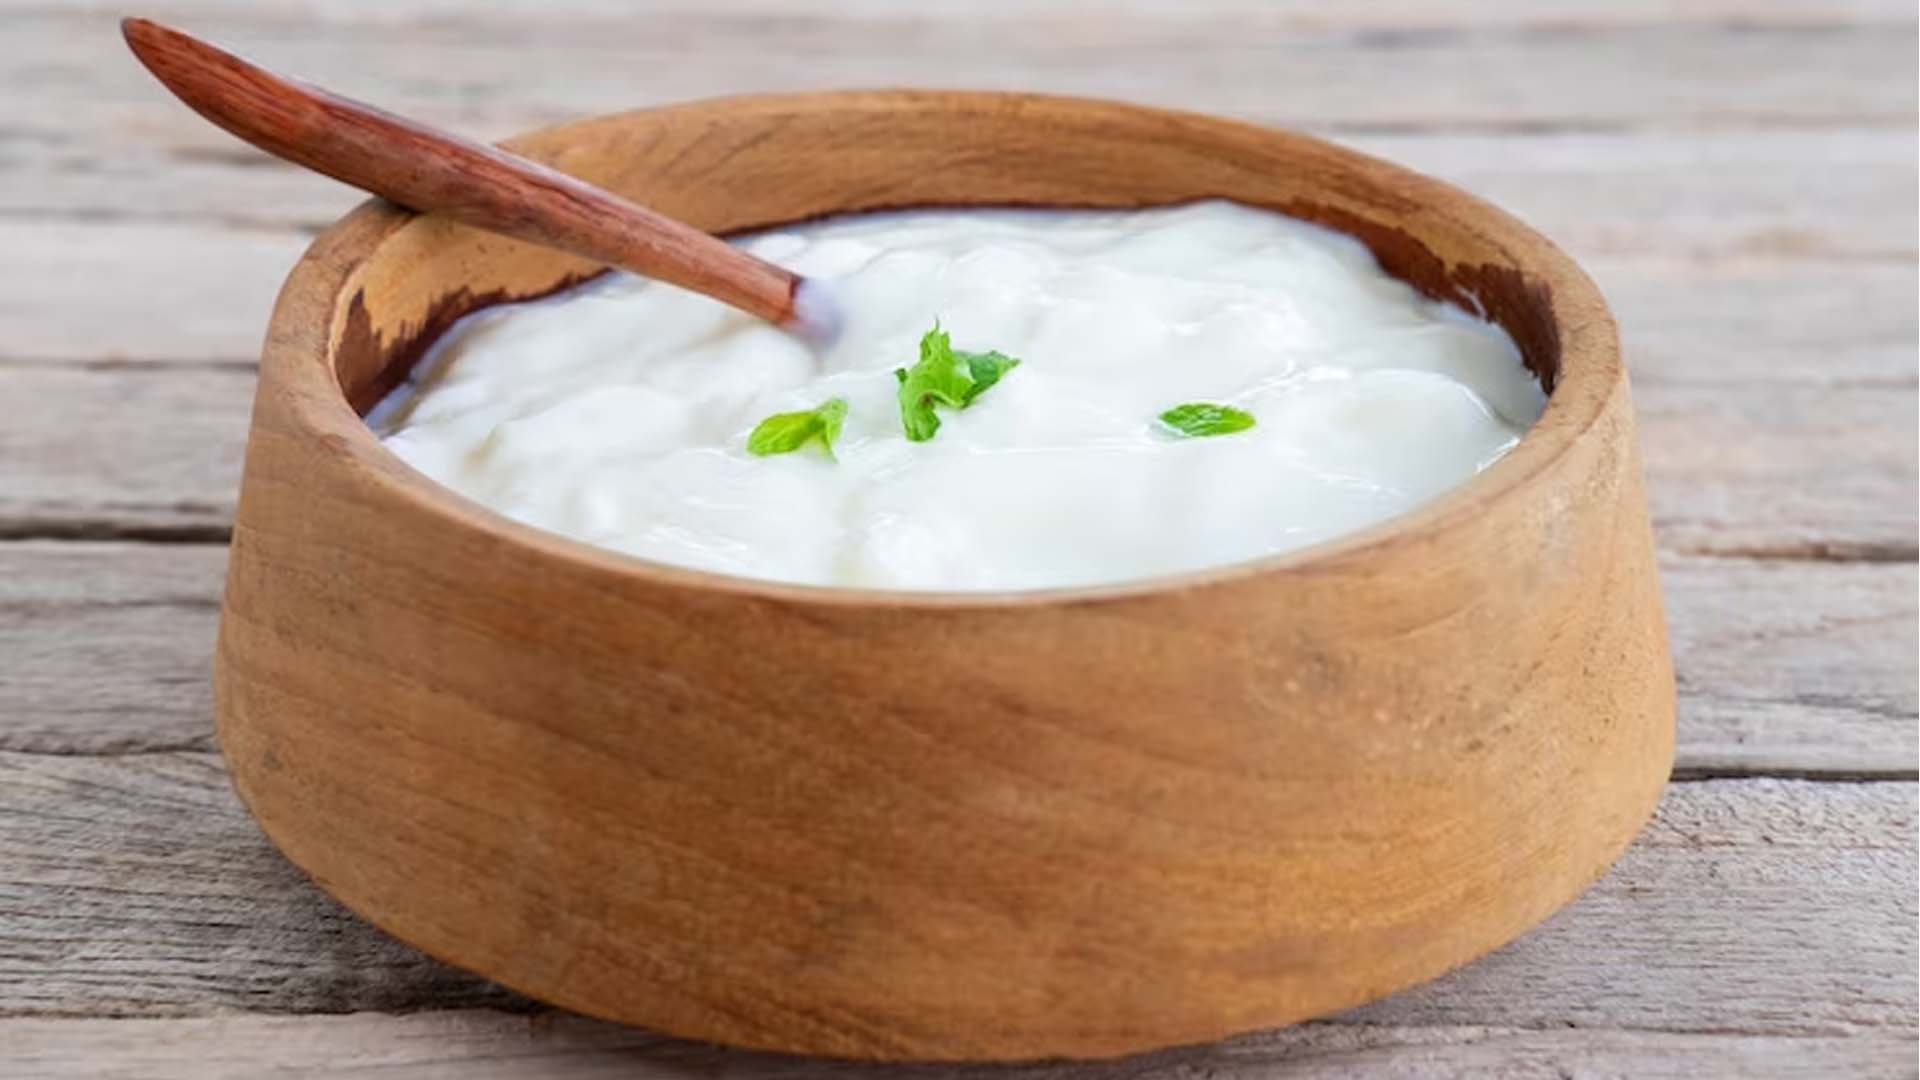 Does Curd Cause Acidity?